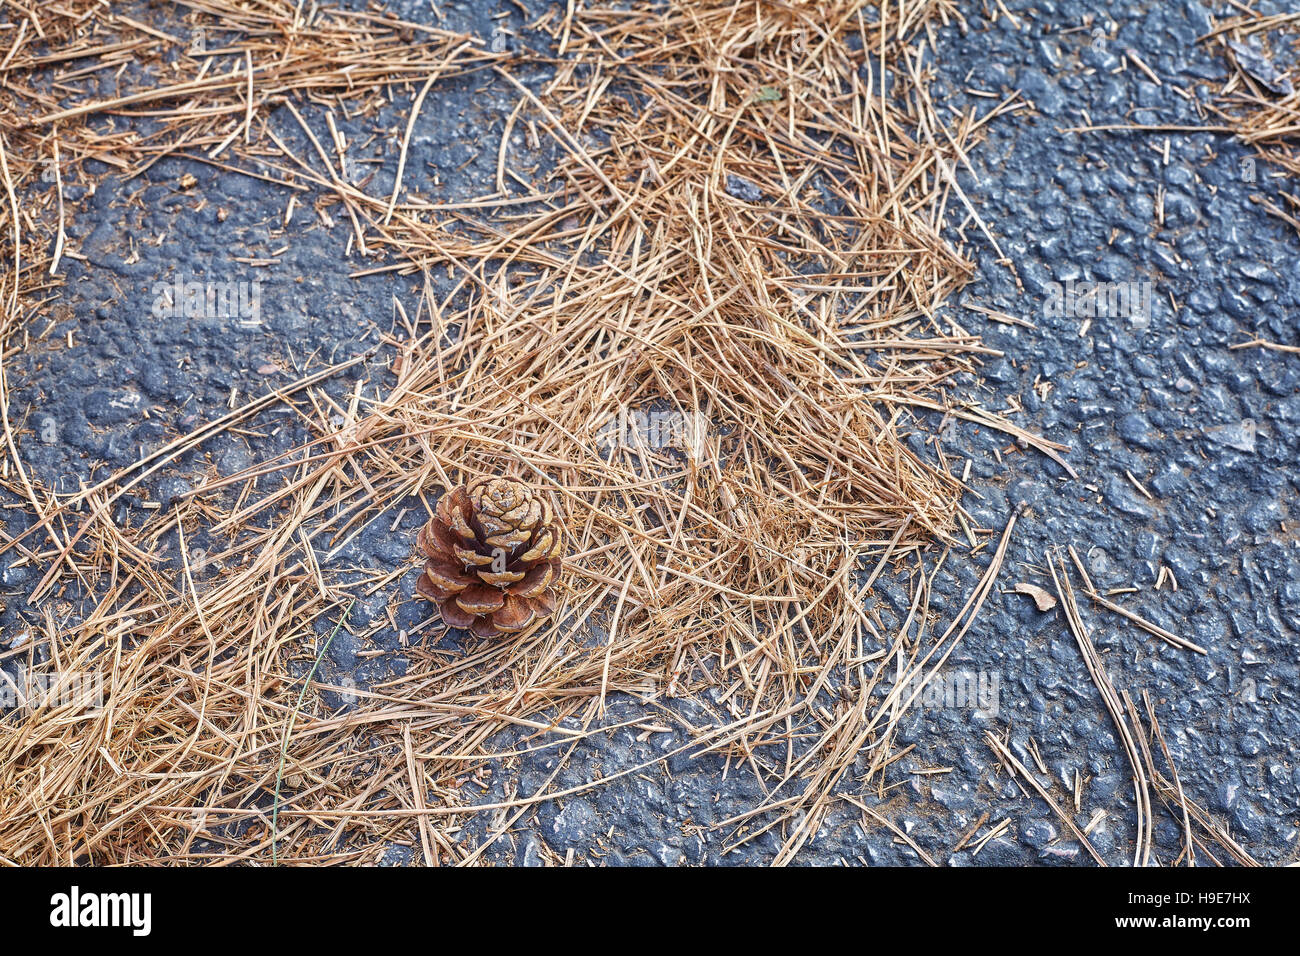 Pine cone and scattered dried grass blades and needles on an asphalt background. Stock Photo